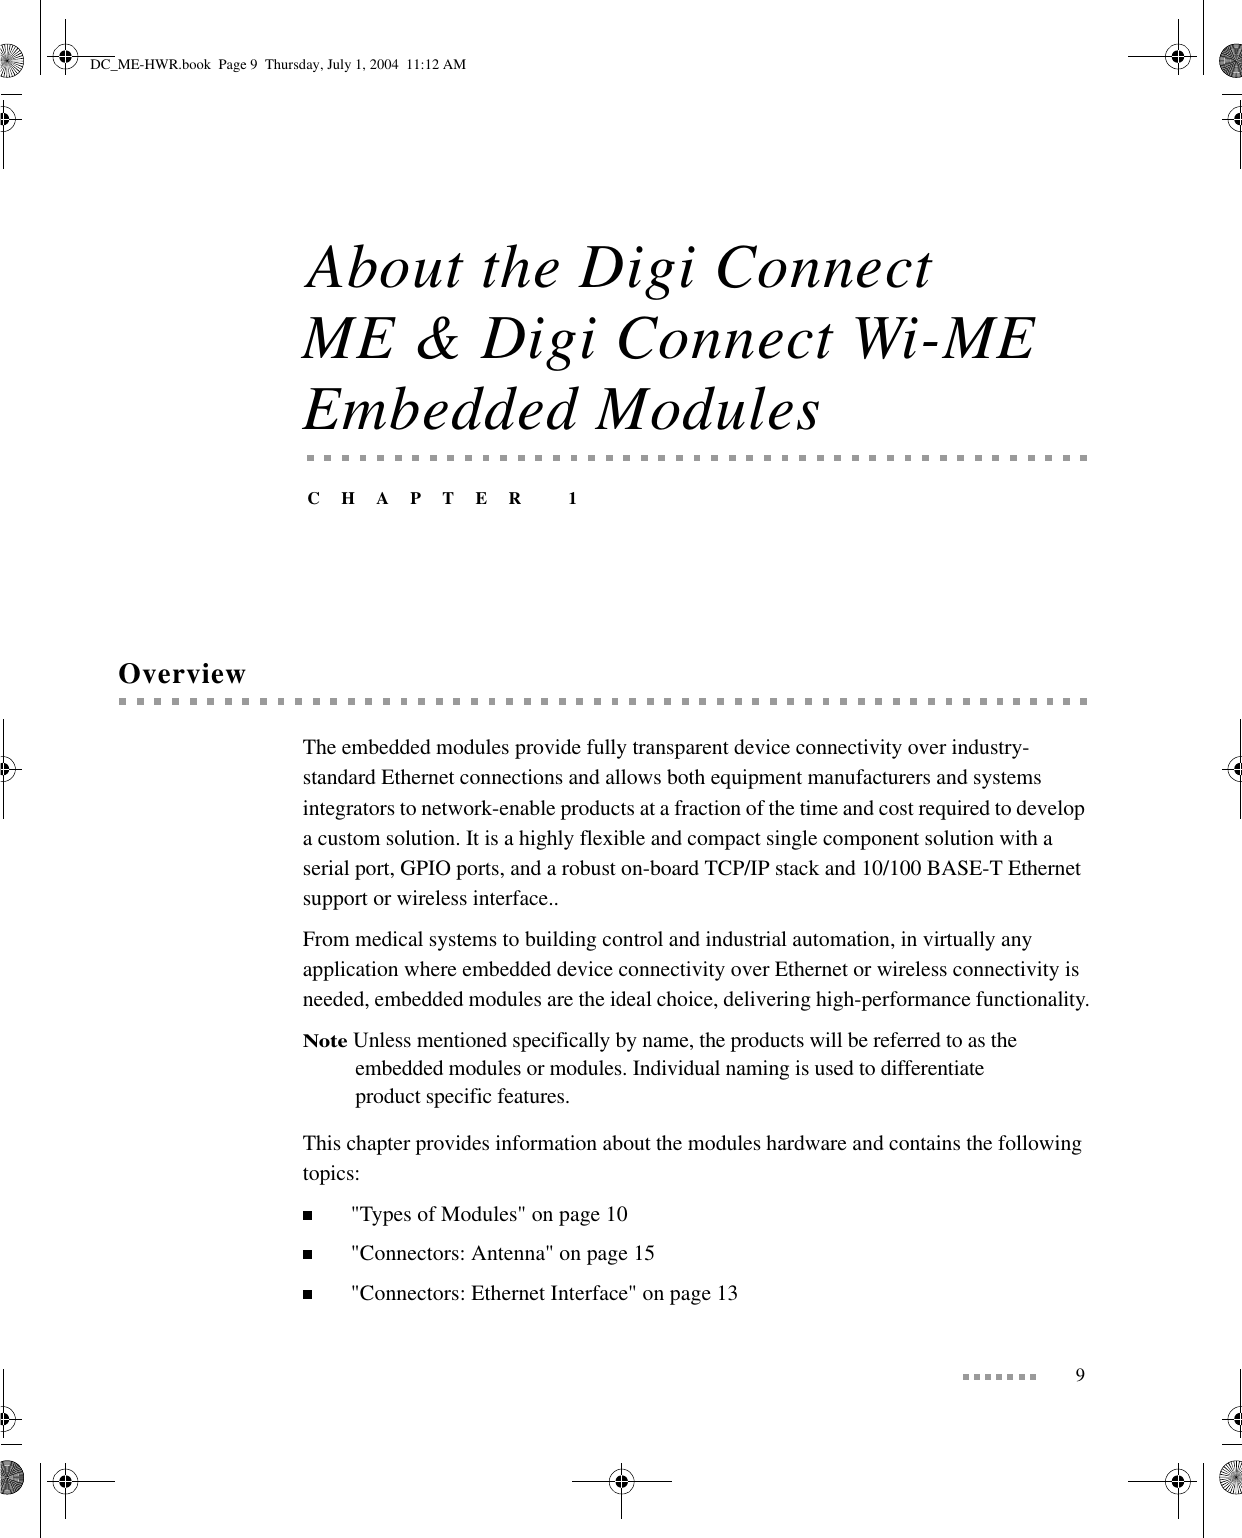 9About the Digi Connect ME &amp; Digi Connect Wi-ME Embedded ModulesCHAPTER 1OverviewThe embedded modules provide fully transparent device connectivity over industry-standard Ethernet connections and allows both equipment manufacturers and systems integrators to network-enable products at a fraction of the time and cost required to develop a custom solution. It is a highly flexible and compact single component solution with a serial port, GPIO ports, and a robust on-board TCP/IP stack and 10/100 BASE-T Ethernet support or wireless interface..From medical systems to building control and industrial automation, in virtually any application where embedded device connectivity over Ethernet or wireless connectivity is needed, embedded modules are the ideal choice, delivering high-performance functionality.Note Unless mentioned specifically by name, the products will be referred to as the embedded modules or modules. Individual naming is used to differentiate product specific features.This chapter provides information about the modules hardware and contains the following topics:&quot;Types of Modules&quot; on page 10&quot;Connectors: Antenna&quot; on page 15&quot;Connectors: Ethernet Interface&quot; on page 13DC_ME-HWR.book  Page 9  Thursday, July 1, 2004  11:12 AM